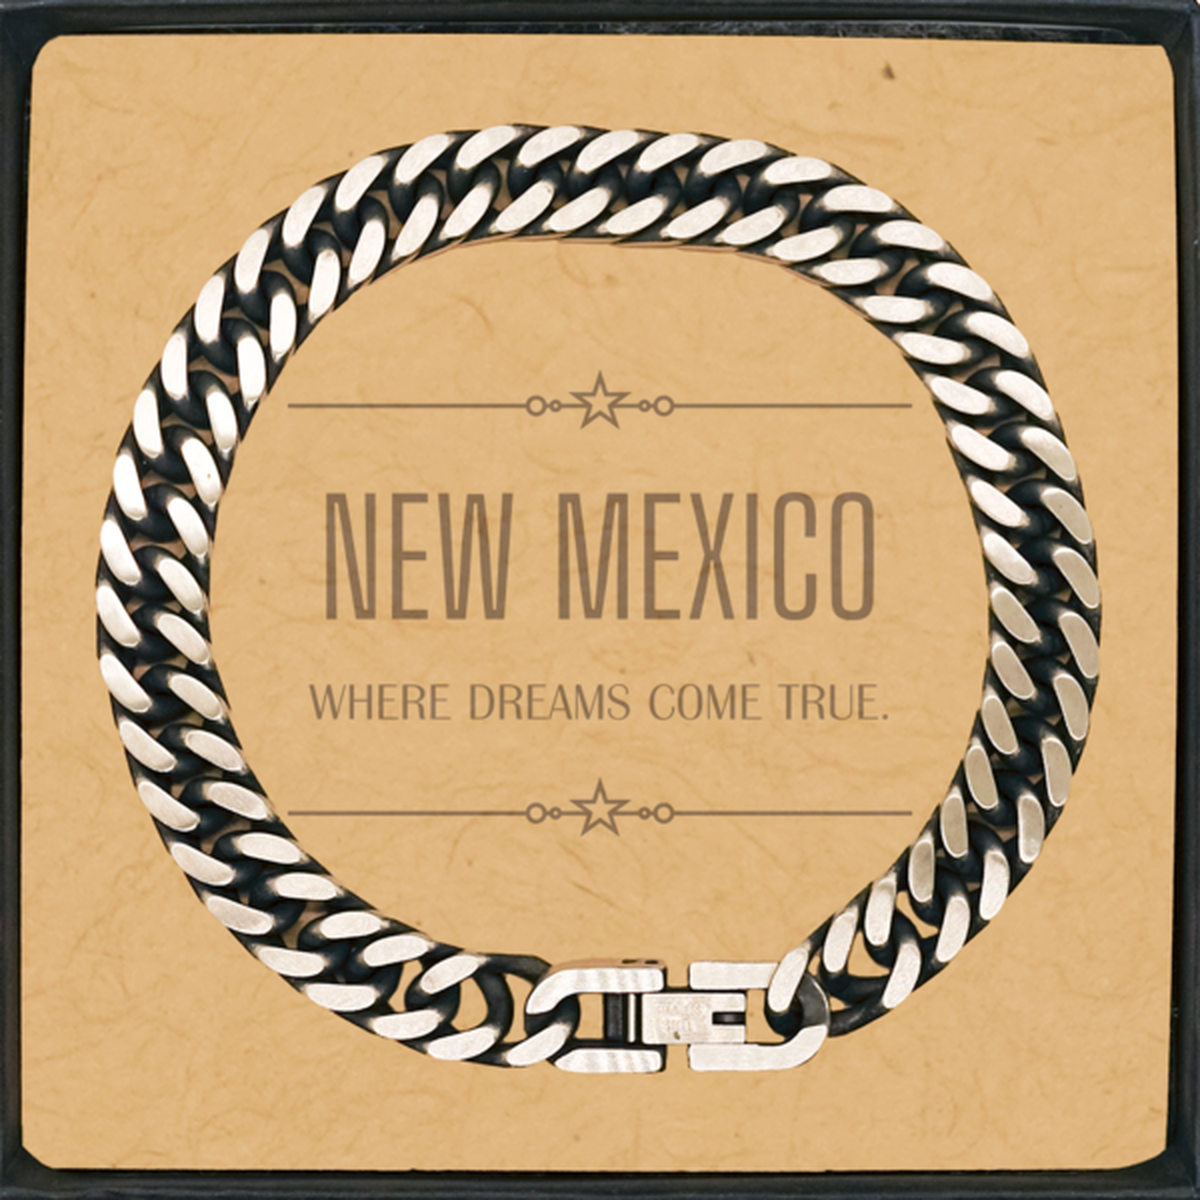 Love New Mexico State Cuban Link Chain Bracelet, New Mexico Where dreams come true, Birthday Inspirational Gifts For New Mexico Men, Women, Friends